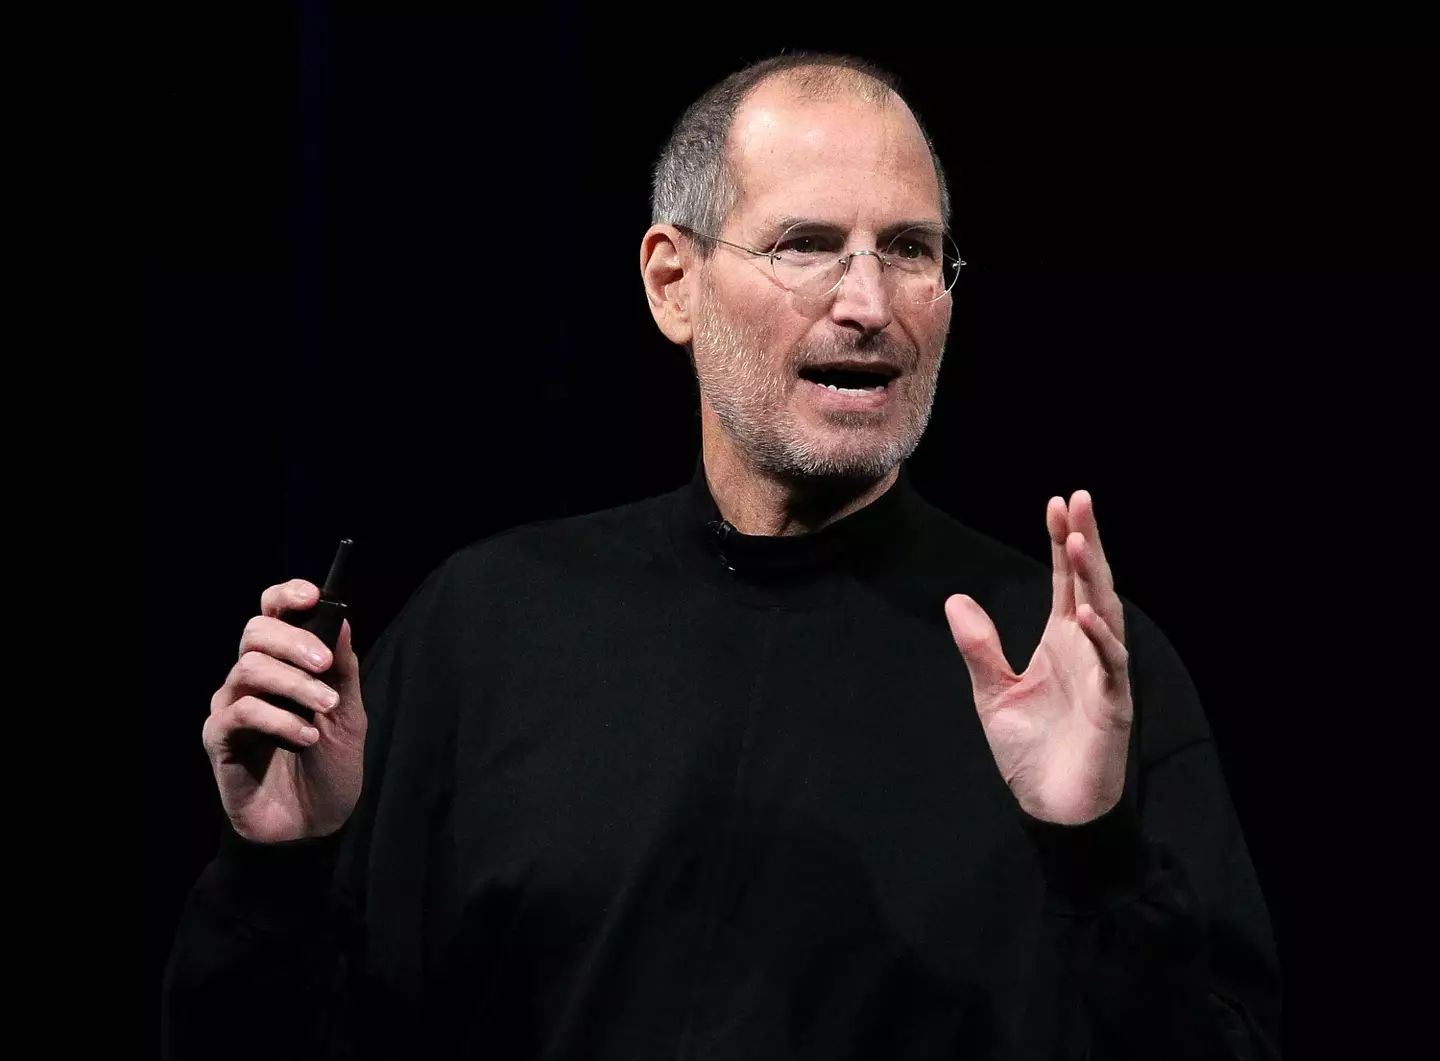 Steve Jobs famously wore the same outfit every day.